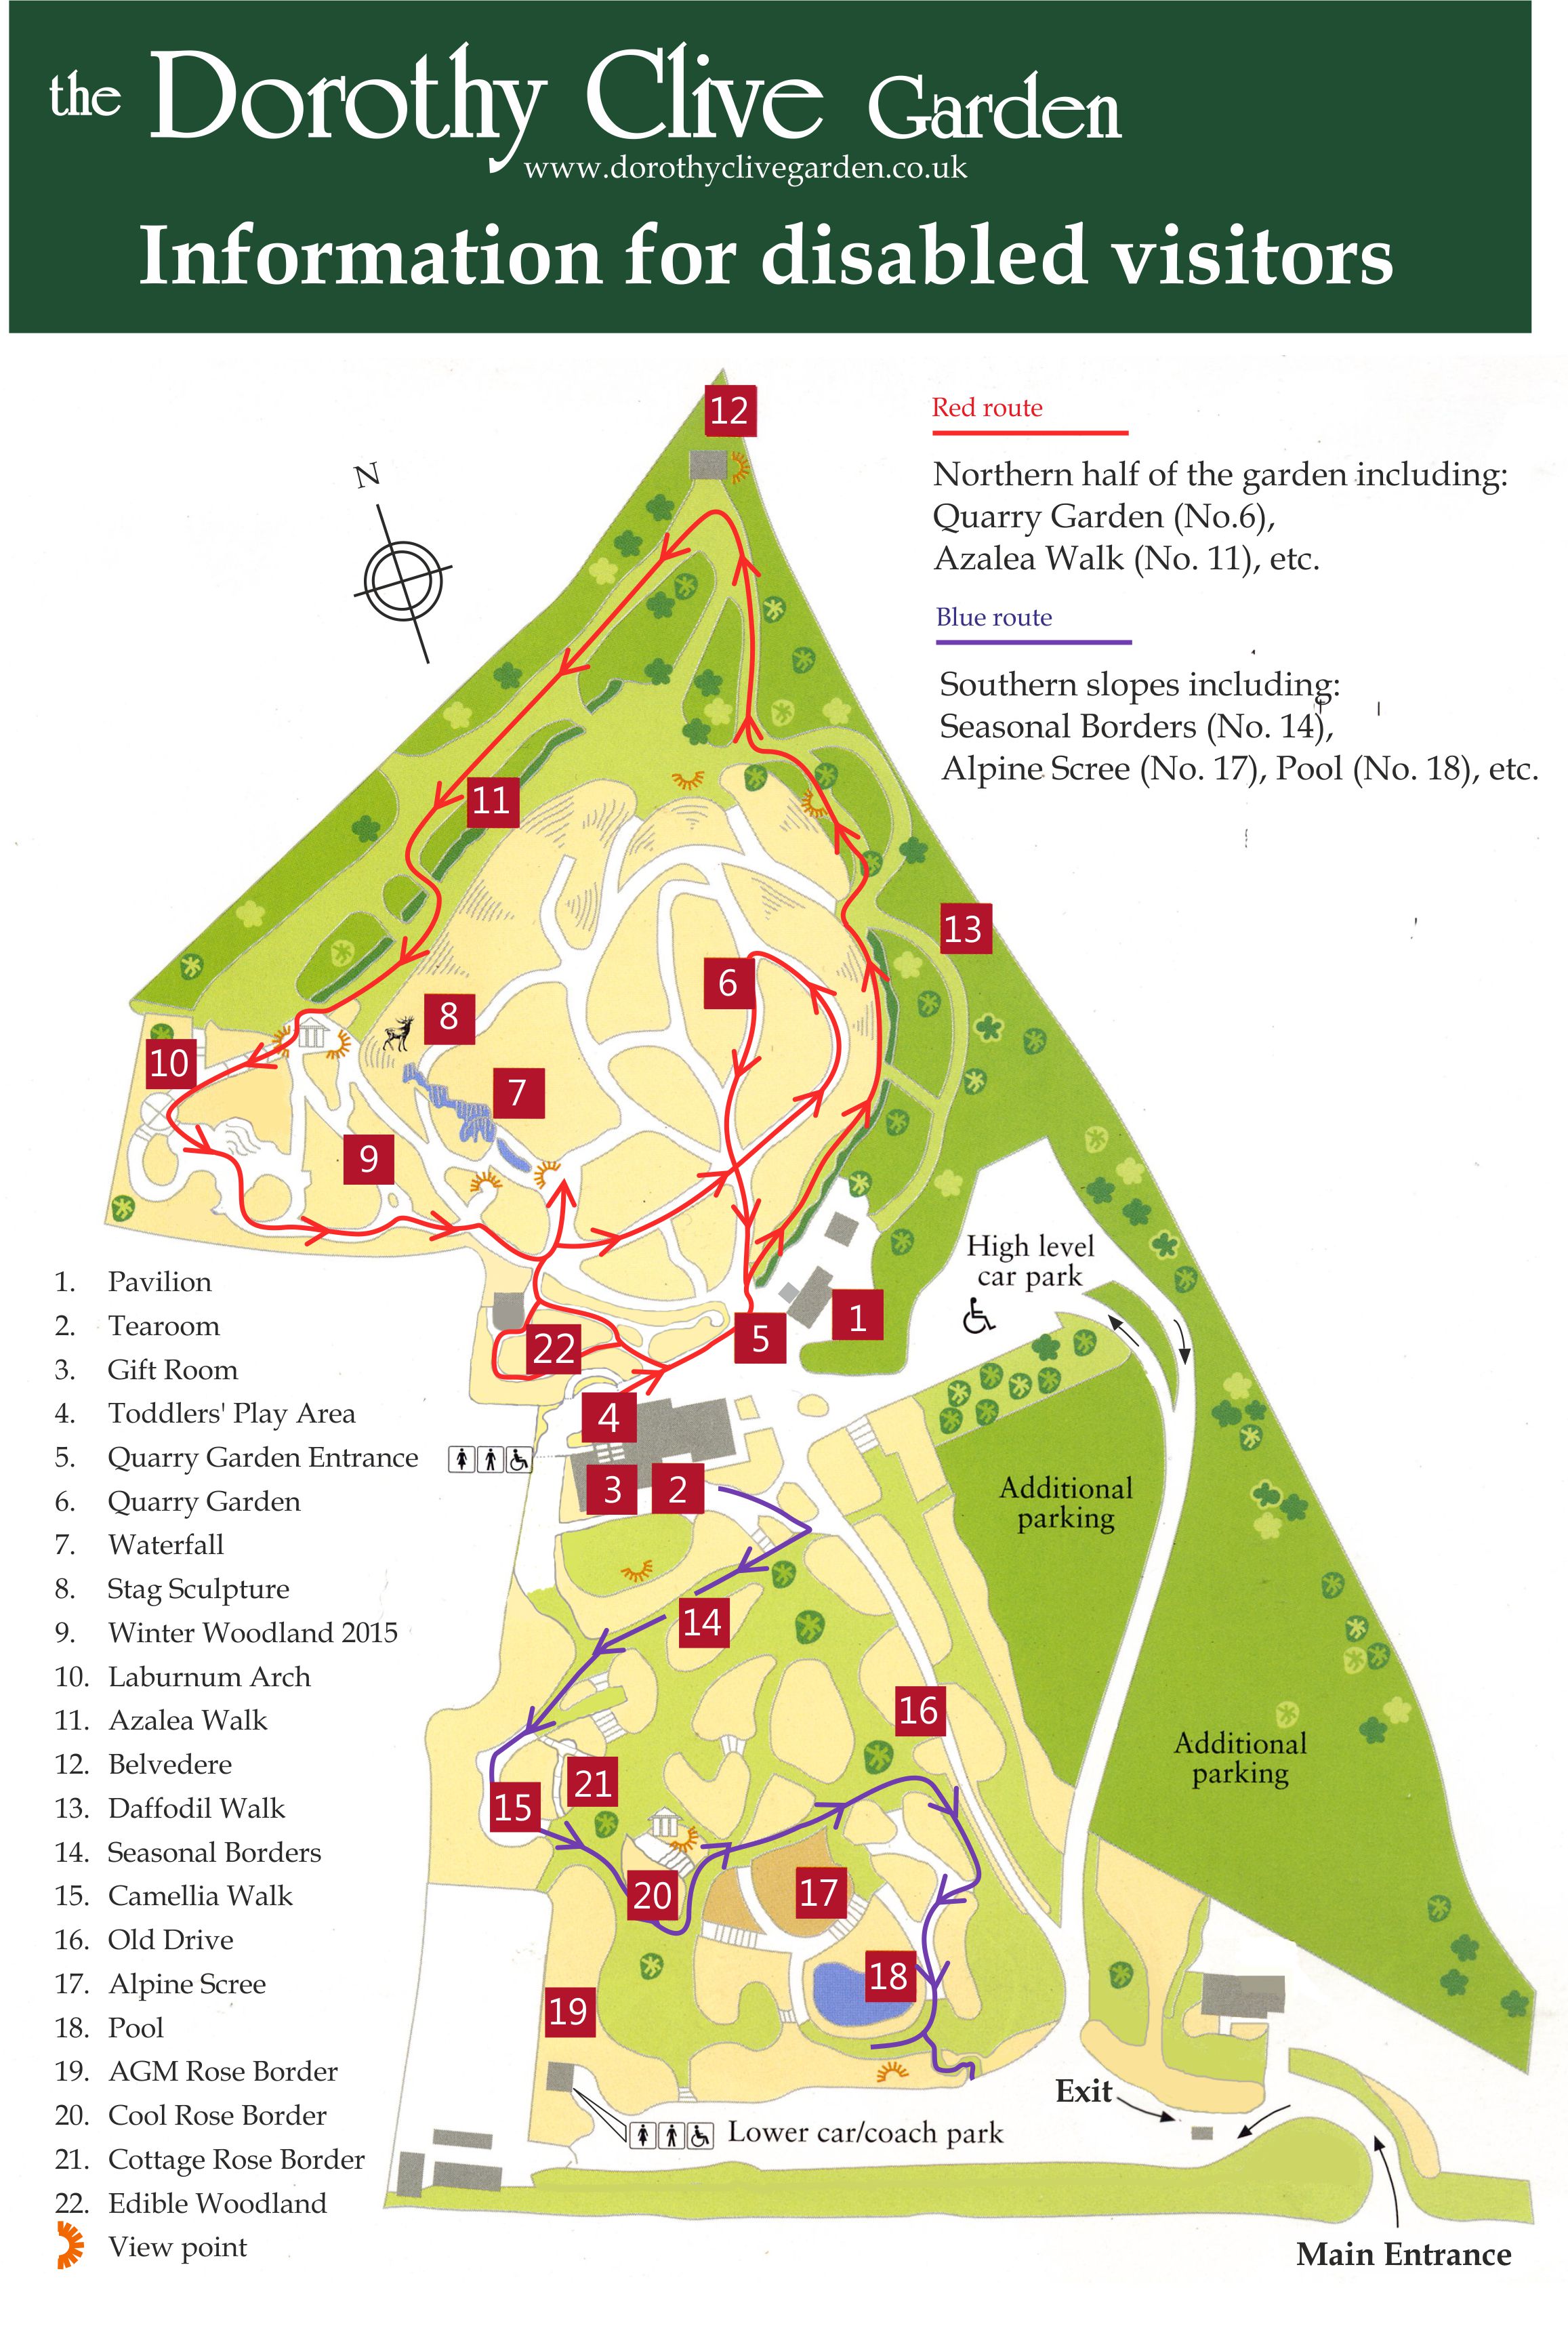 Accessibility Map of the Garden